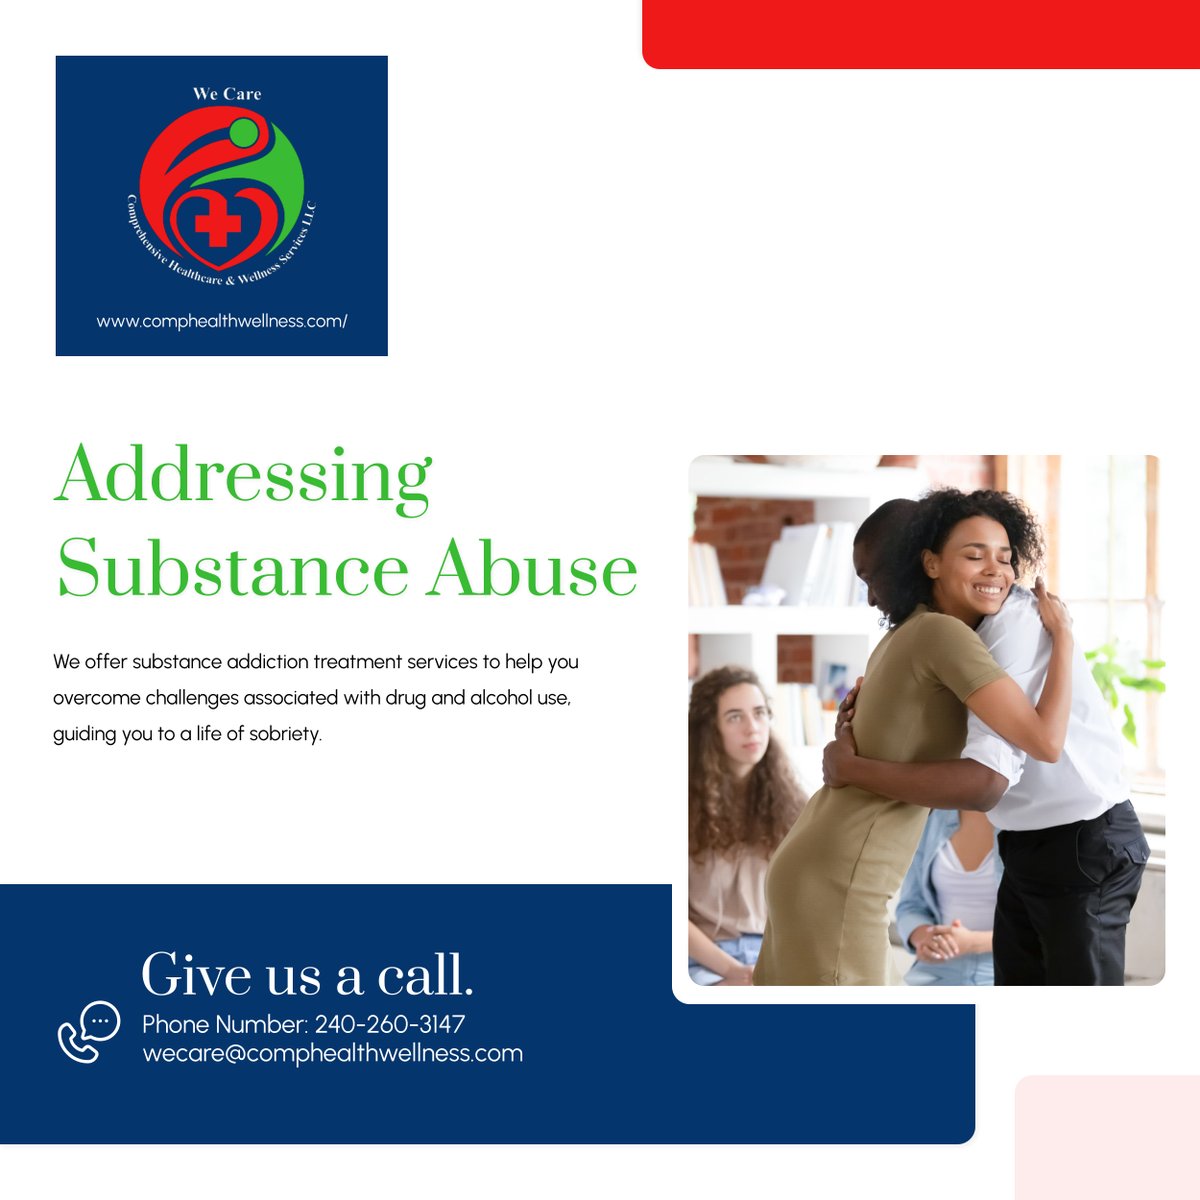 For more information about our substance abuse treatment services and what you could expect from our program, call Comprehensive Healthcare & Wellness Services at 240-260-3147.

#BowieMD #TreatmentServices #CallUs #OvercomeChallenges #BehavioralHealthCare